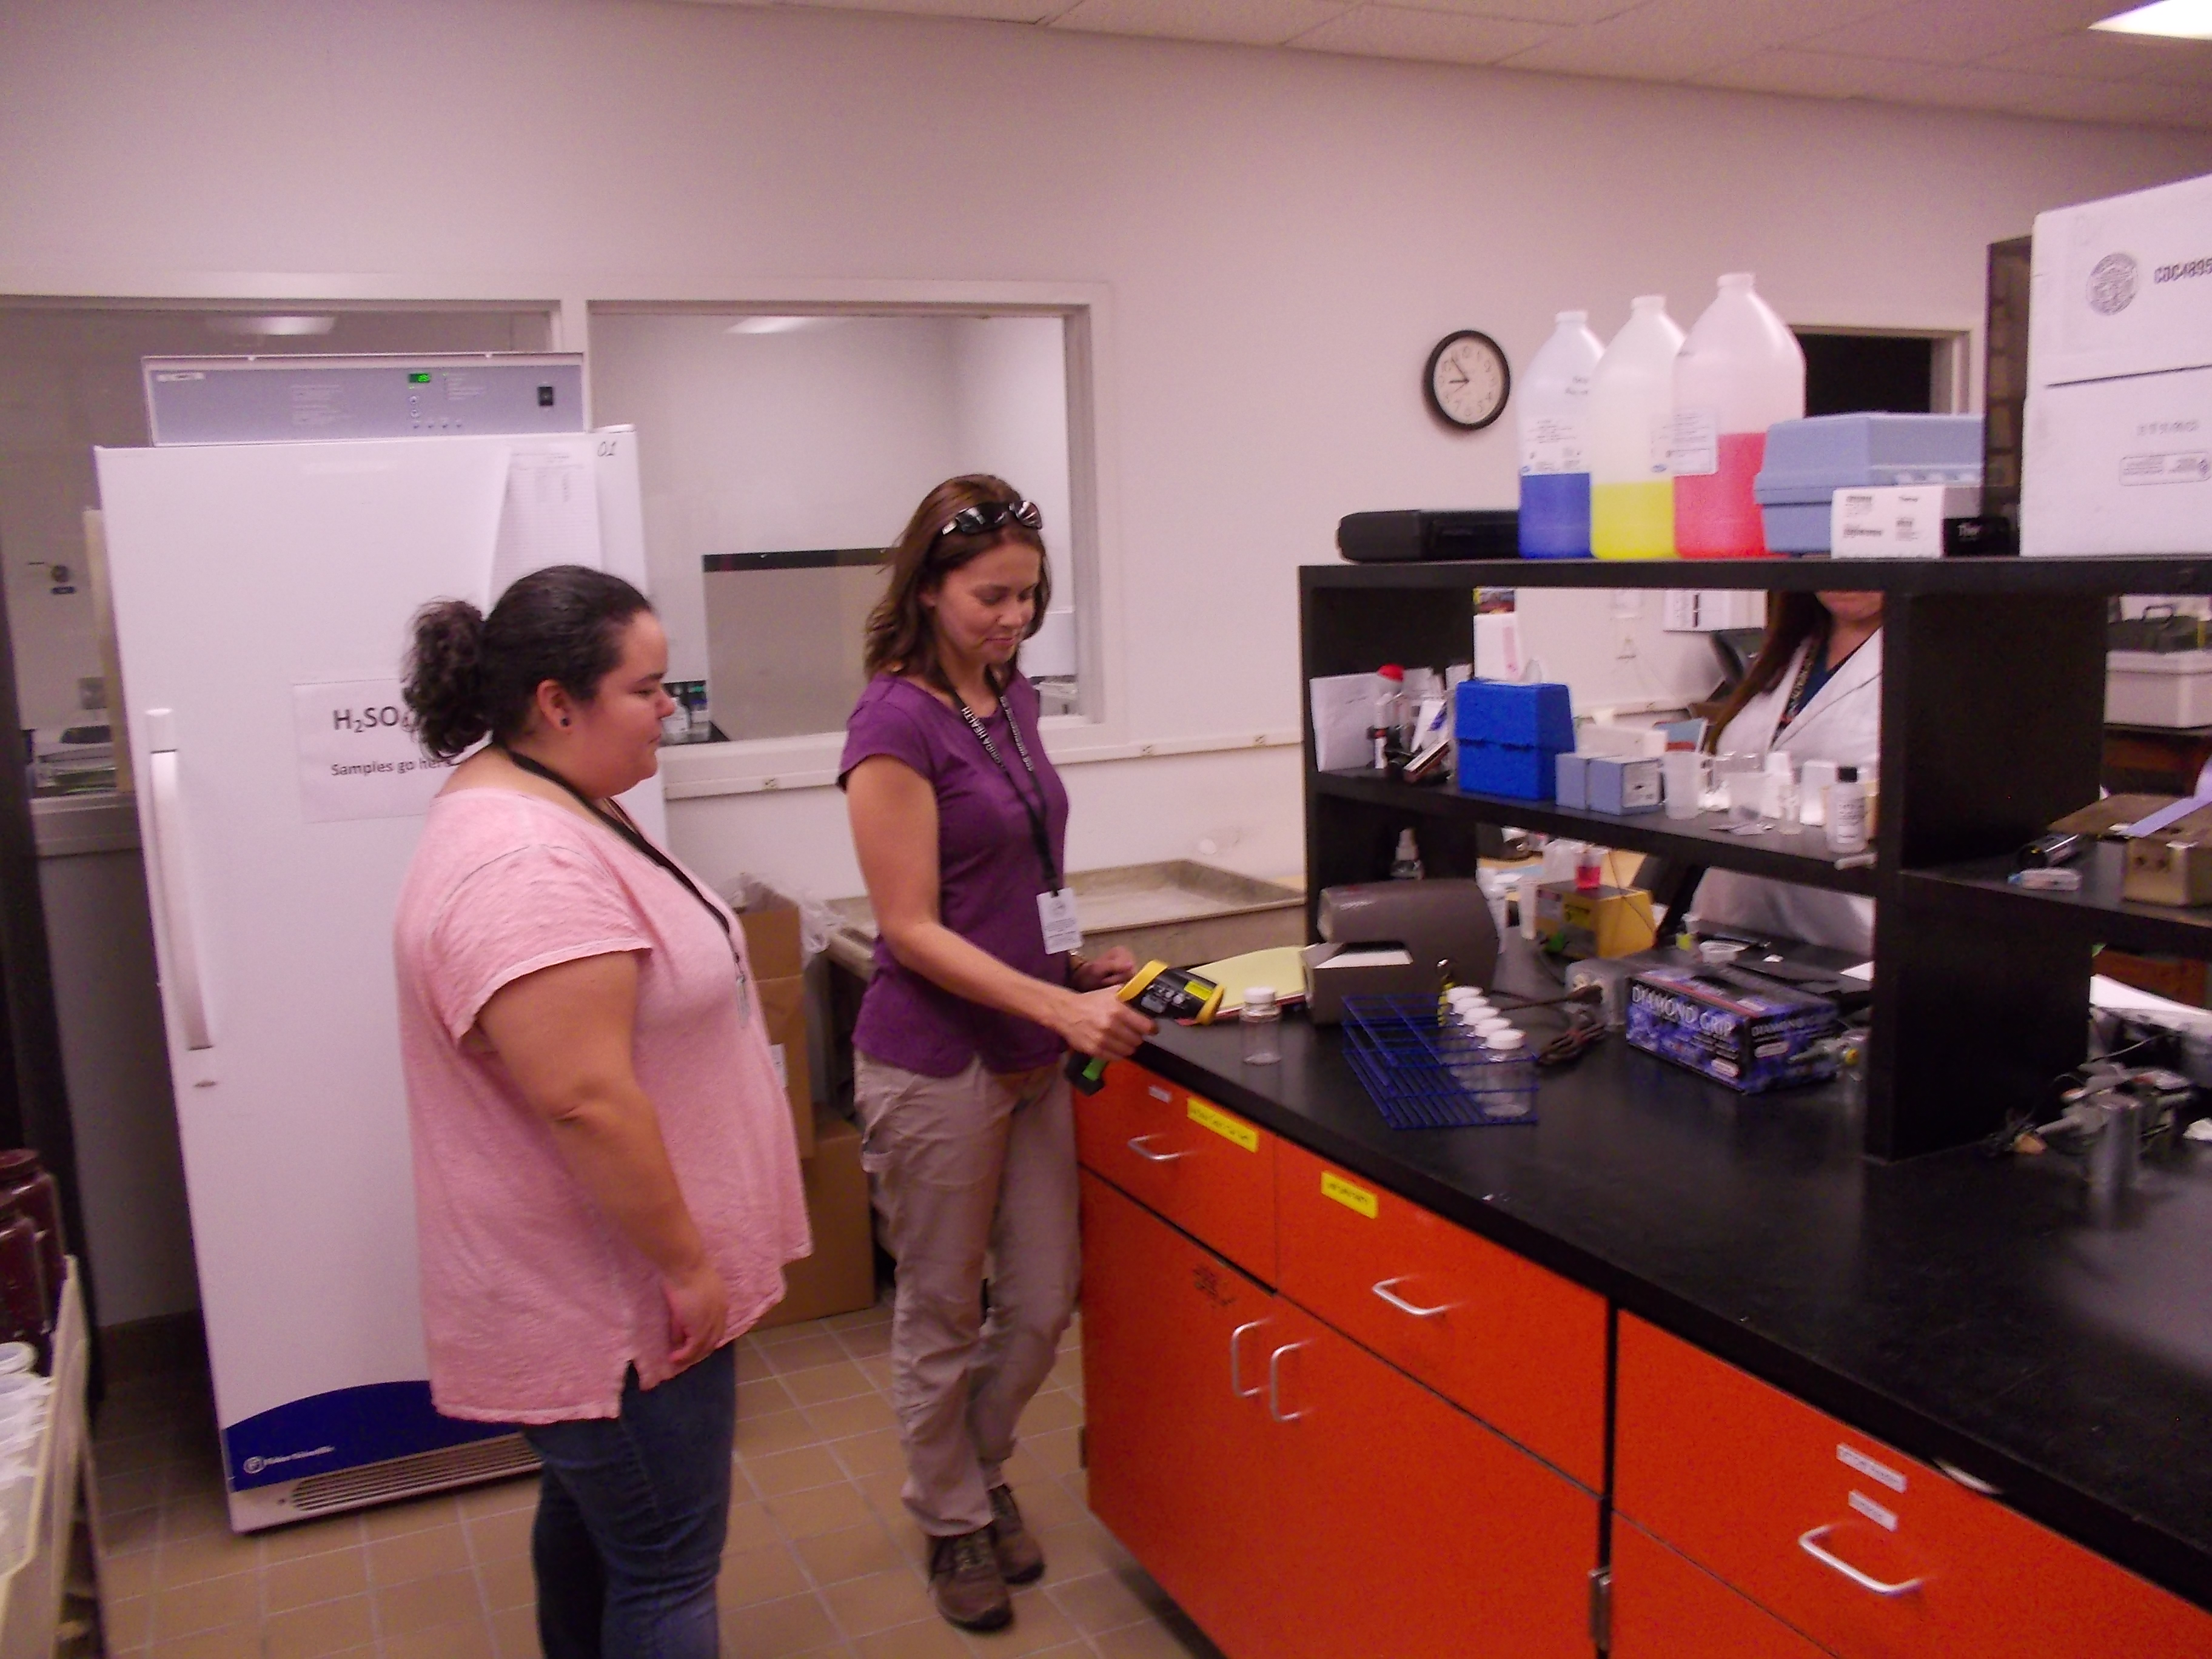 Left to Right – Andrea Garcia and Stacy Nichols checking the temperature of a water sample